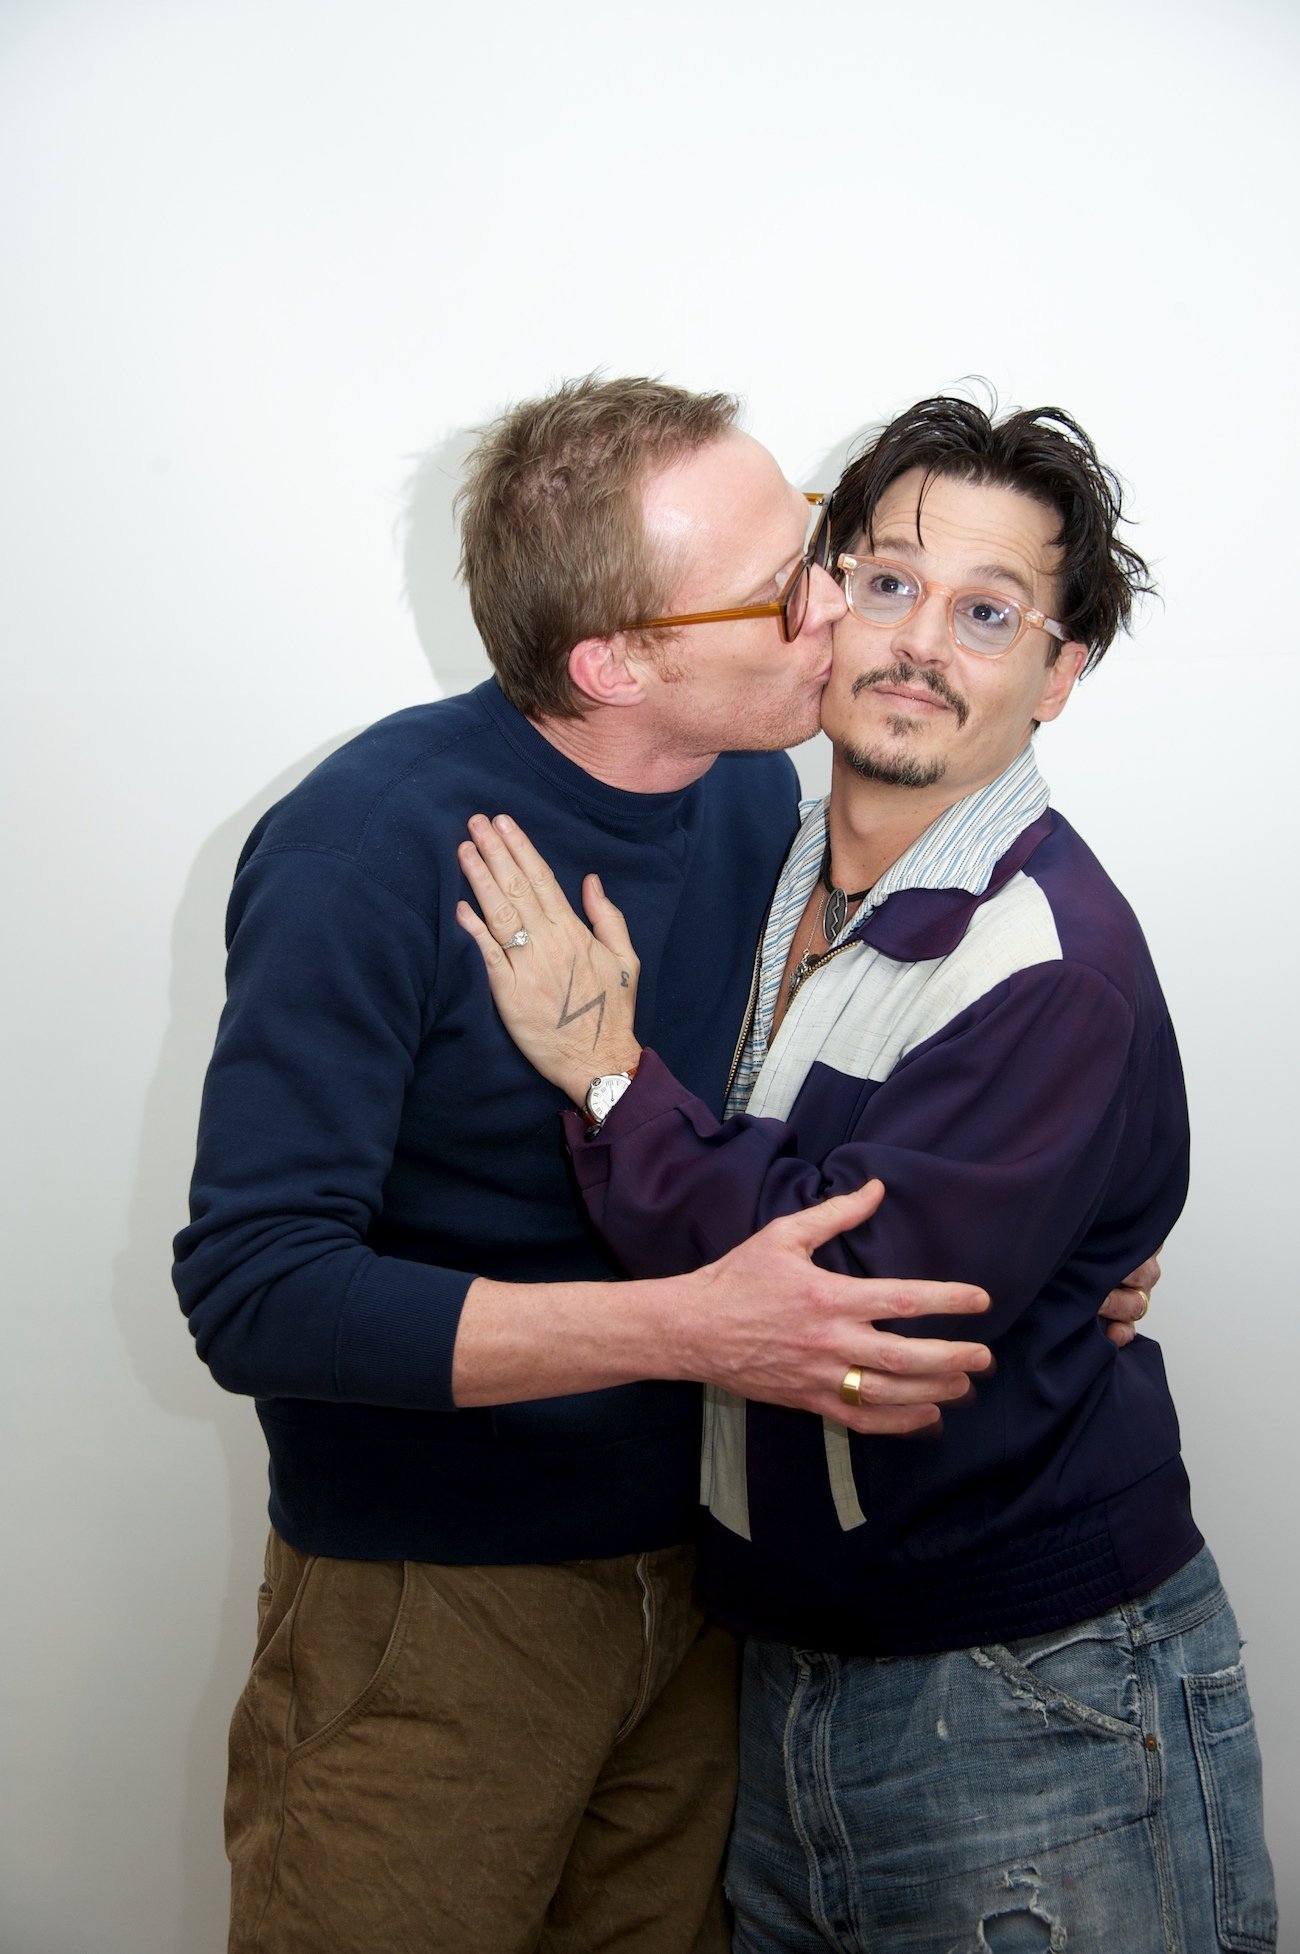 Paul Bettany kissing Johnny Depp on the cheek, 'Transcendence' Press Conference